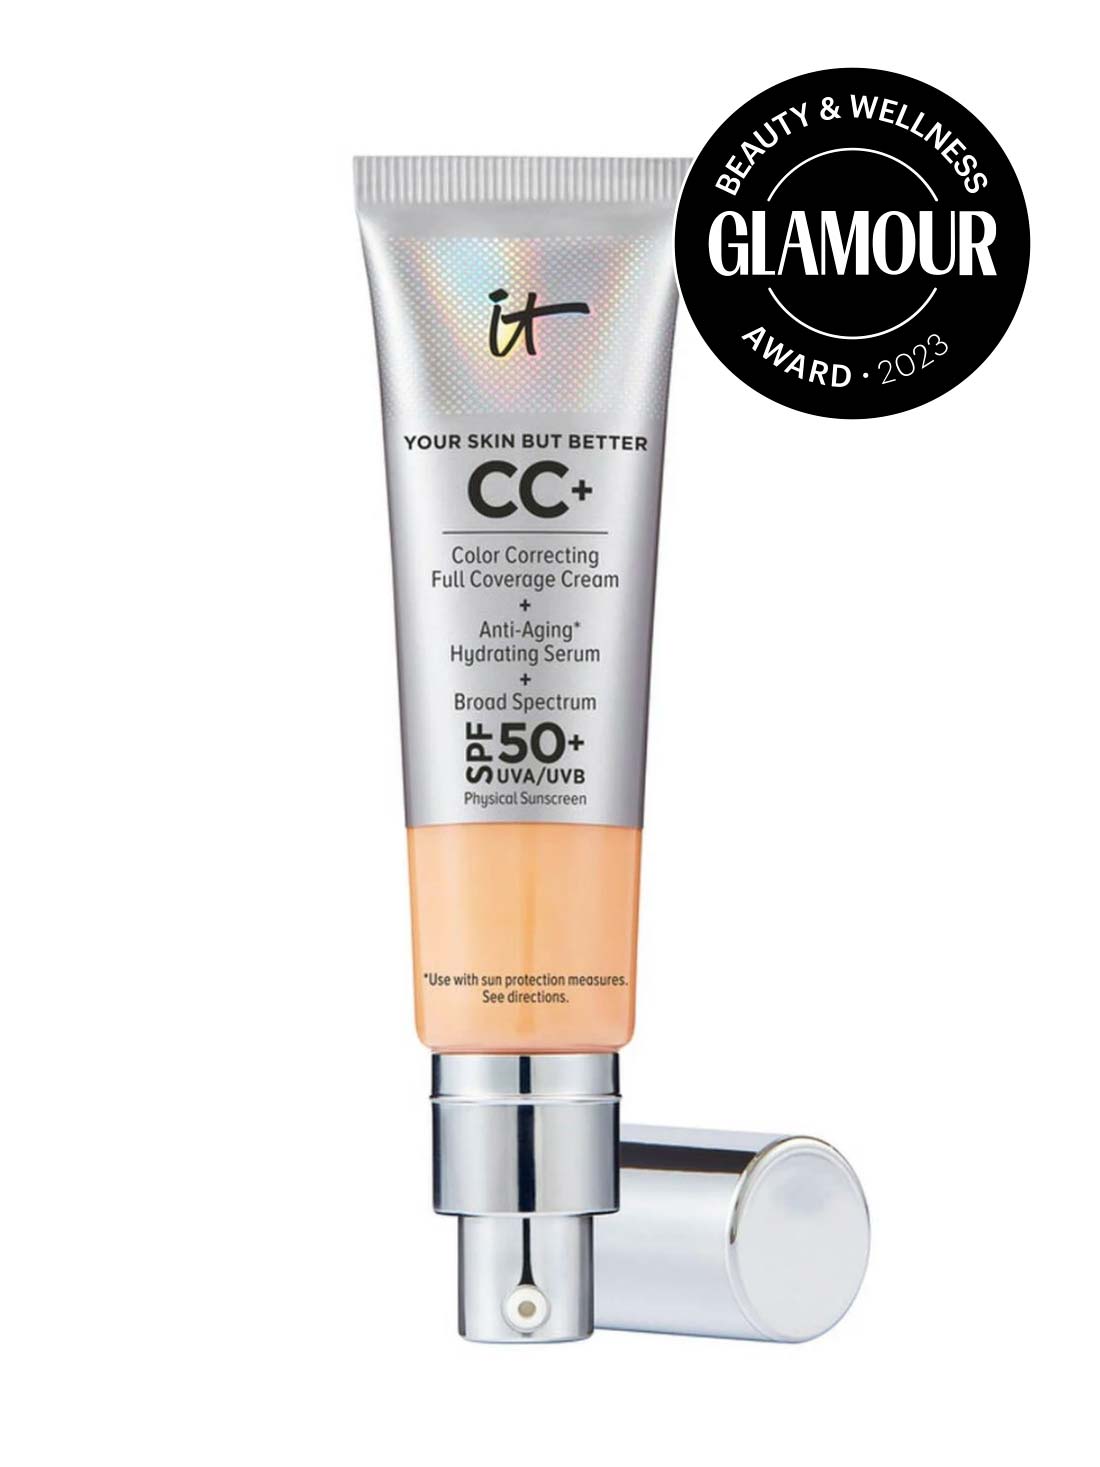 <p>There’s a reason this CC cream has spent years on the bestseller list: It really is <em>that</em> good. And nearly every dermatologist, makeup artist, and beauty editor we spoke to listed it among their favorite complexion products—it even won a <a href="https://www.glamour.com/gallery/beauty-awards-readers-choice-product-winners?mbid=synd_msn_rss&utm_source=msn&utm_medium=syndication">2023 Glamour Beauty Award</a>. “This is one of my go-to CC creams because it comes in so many shades and provides outstanding even coverage,” says celebrity makeup artist and head of makeup at the 2024 Oscars, <a href="https://www.instagram.com/brucegrayson/?hl=en">Bruce Grayson</a>. “It immediately reduces the appearance of discoloration, uses high levels of hyaluronic acid and broad-based sunscreen to hydrate and protect skin from the sun. This product is the definition of multi-tasking makeup.” We also love the natural finish and full coverage color payoff, which rivals that of your favorite foundation while also providing all the benefits of a hydrating serum and SPF. The cult-favorite It Cosmetics CC+ Cream also comes in a <a href="https://cna.st/affiliate-link/9wuTcQB4CMStr3sqUmcWmmwyVLBqVoj42oxx2yHFJLbXA5kMBncnqbaoTe6bLrkC3yPgip6NL4FLcwu7VAvkiSRcDnJHMkGPJd9zB1sw57WvqwjEwFQNQwyFcvgeD62qn2xFi8DWhqgX7VAosD7V9W5Fg7h6Ny25XzD2vuPYMFkCp94zkhPuKwNmosUjwEk8rRB3ThorjNKUNSrvx" rel="sponsored">new matte formula</a>.</p> <p><strong>Size:</strong> 1.08 ounces / <strong>Shades:</strong> 22 / <strong>Key Ingredients:</strong> Hyaluronic acid, niacinamide, vitamin E / <strong>Finish:</strong> Natural / <strong>SPF:</strong> 50+</p> <ul> <li><strong>Pros</strong>: Buildable full coverage, a little goes a long way</li> <li><strong>Cons</strong>: Heavier than most traditional CC Creams</li> </ul> $47, Sephora. <a href="https://www.sephora.com/product/your-skin-but-better-cc-cream-spf-50-P411885">Get it now!</a><p>Sign up for today’s biggest stories, from pop culture to politics.</p><a href="https://www.glamour.com/newsletter/news?sourceCode=msnsend">Sign Up</a>